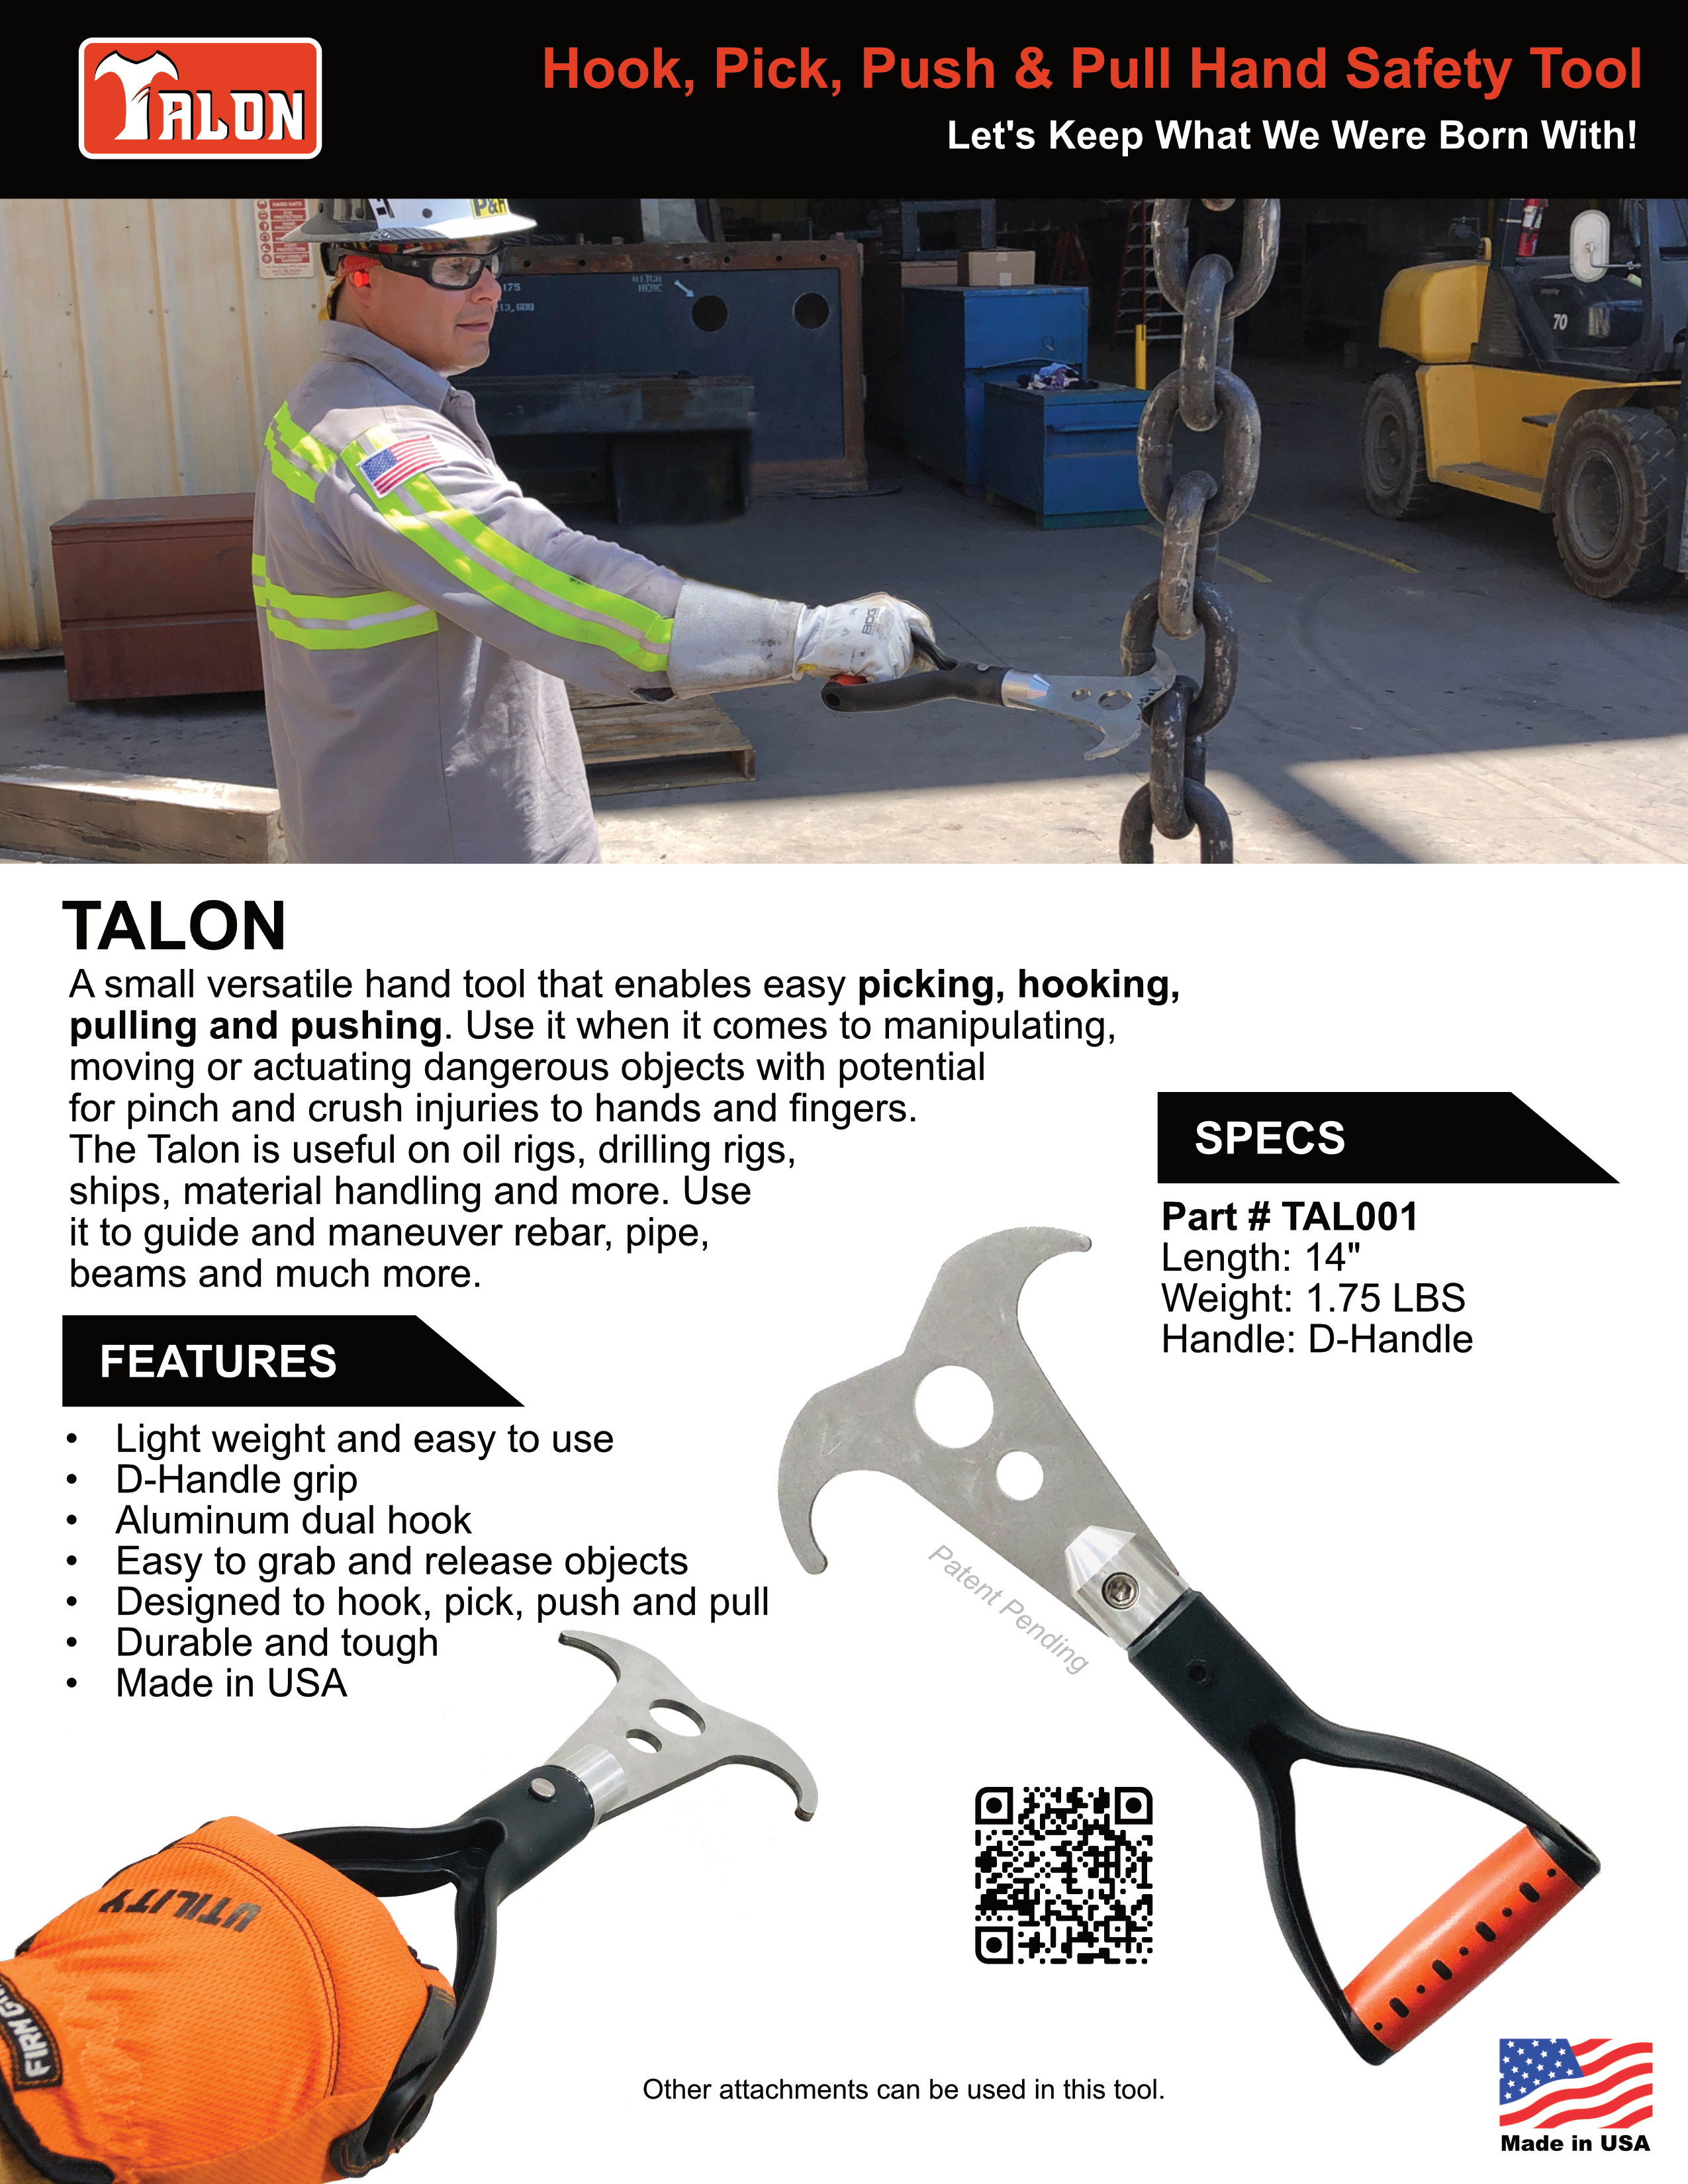 Talon - Dual Hook, Super Strong, Lightweight Hand Safety Tool Used